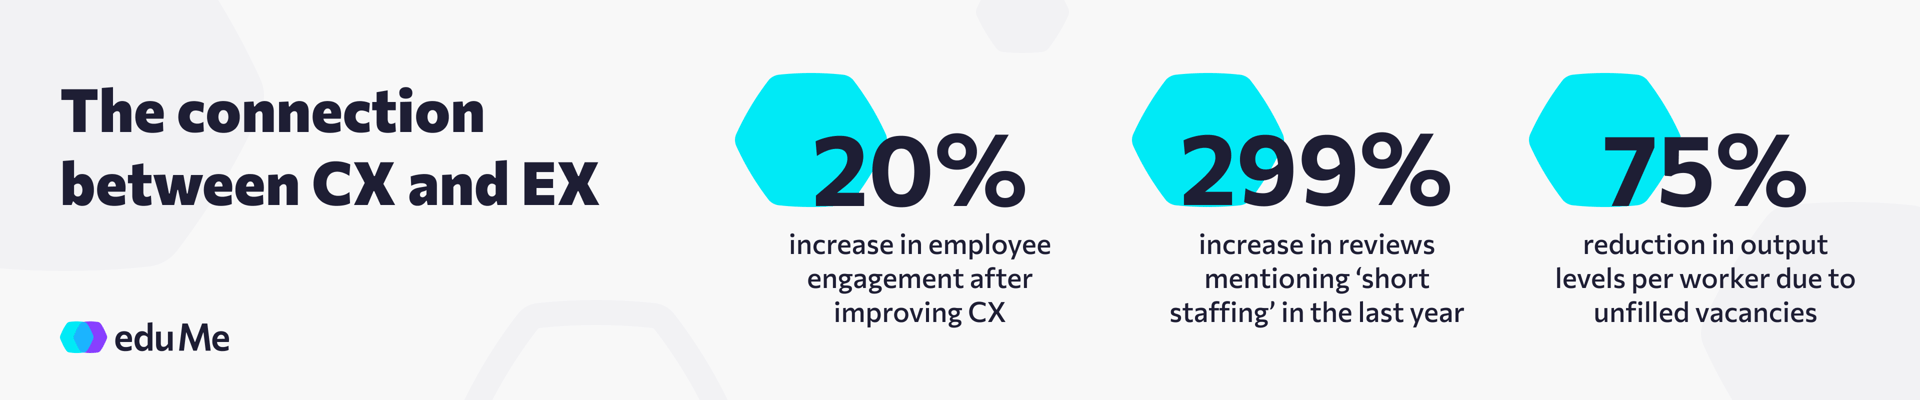 eduMe Infographic: The connection between CX and EX